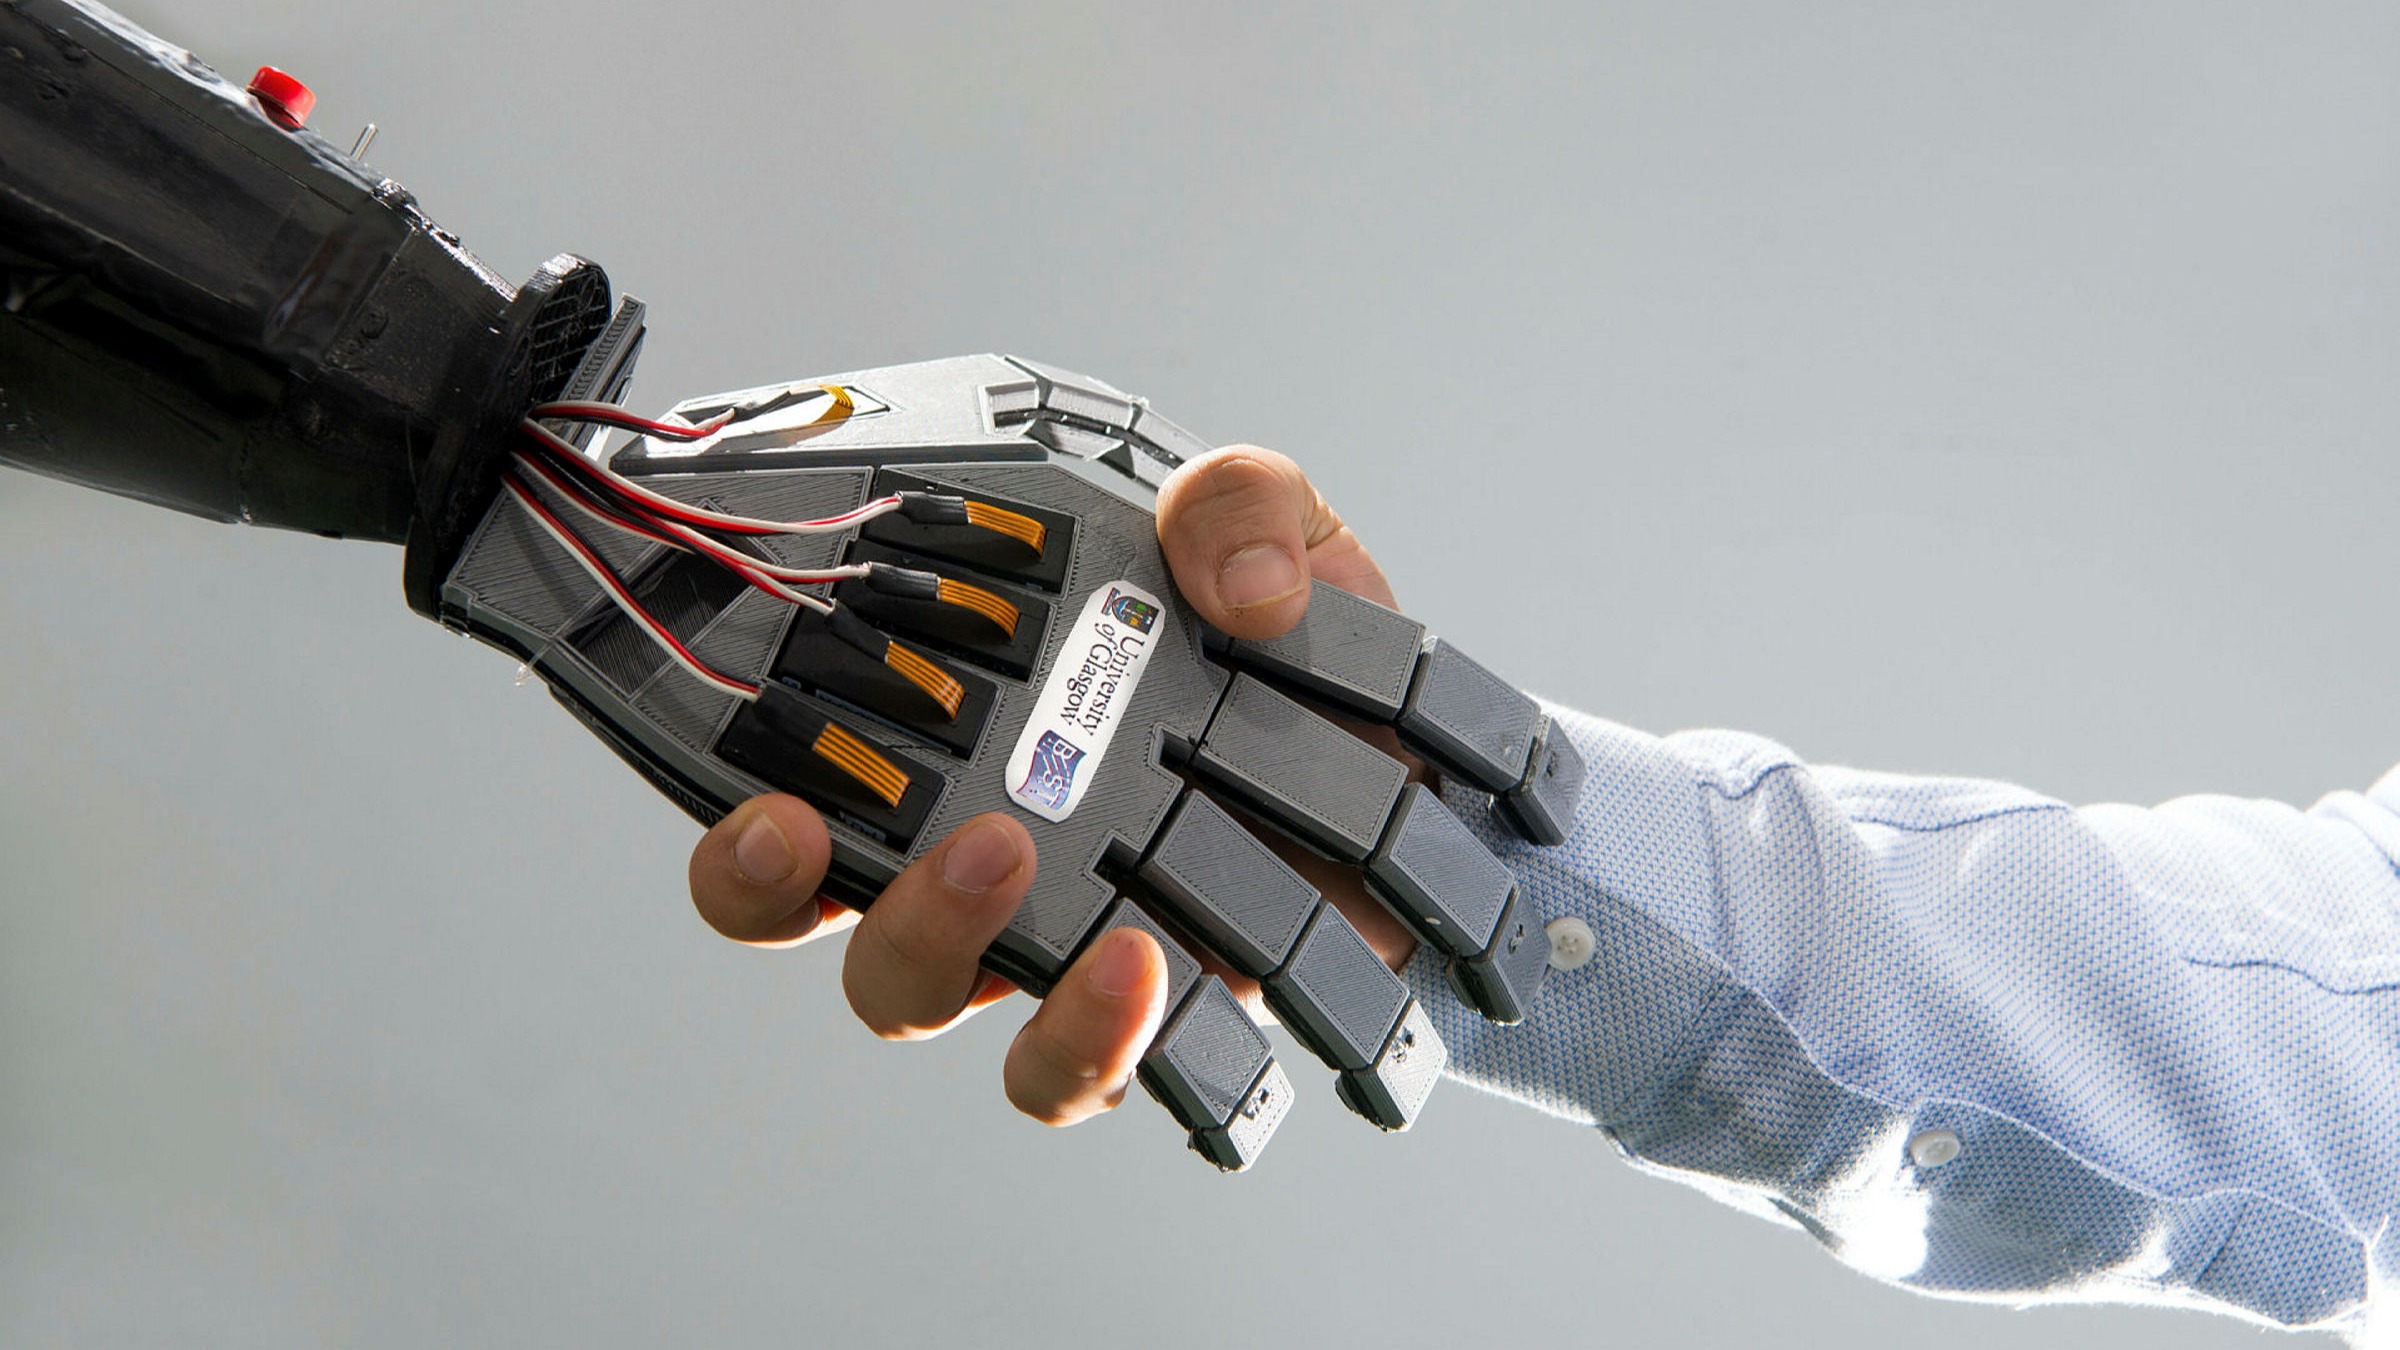 Ouch! Robotic with recoils jabbed in the palm | Financial Times